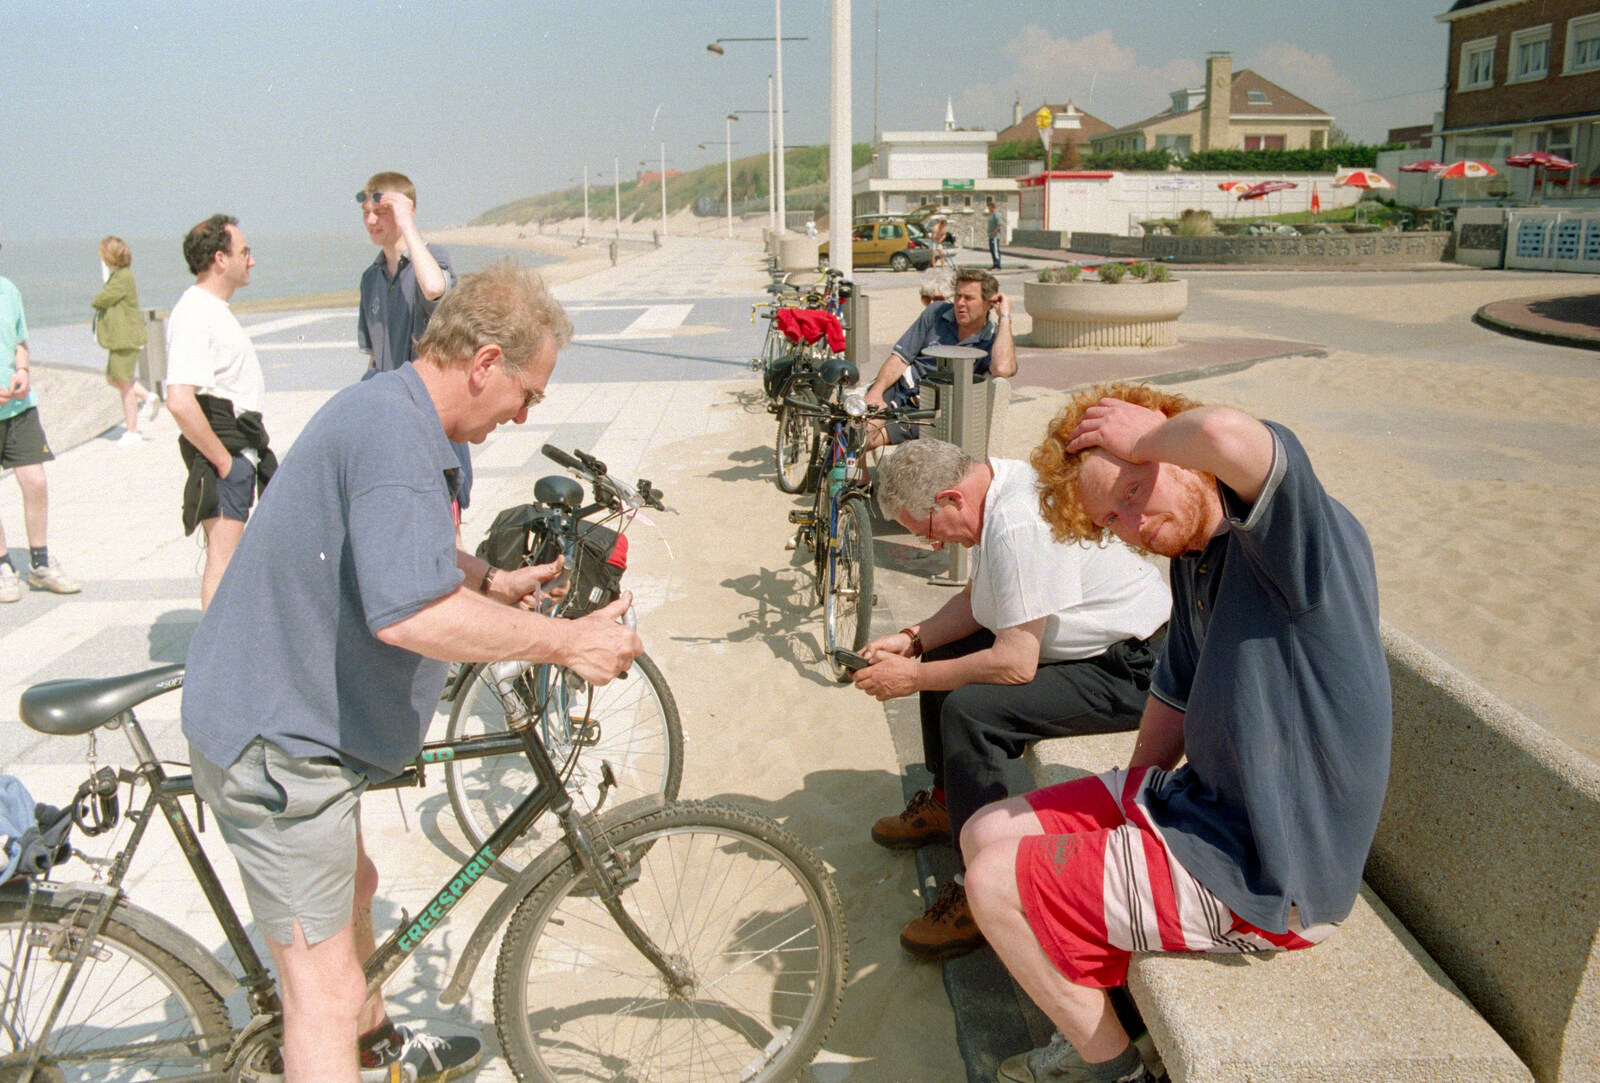 Wavy wakes up from A BSCC Bike Ride to Gravelines, Pas de Calais, France - 11th May 2000